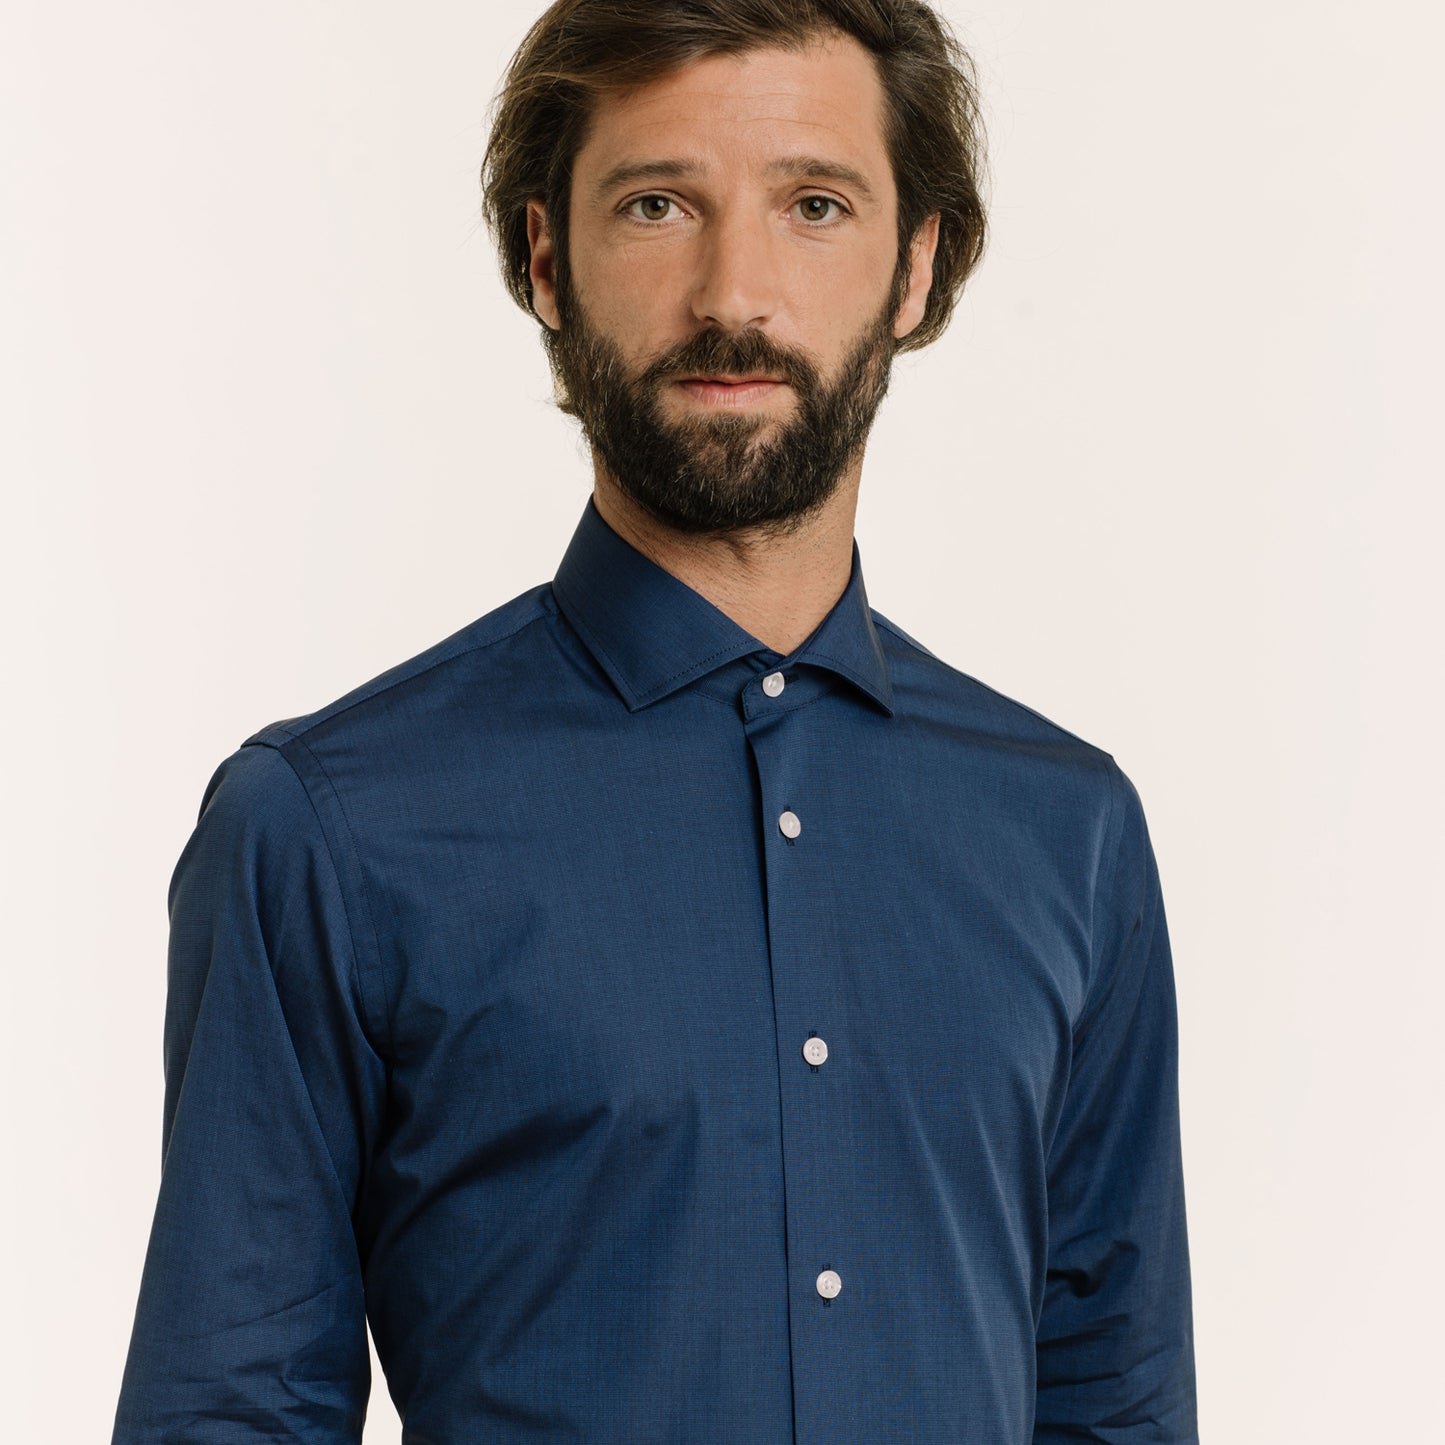 Fitted shirt in midnight blue double-twisted fil-a-fil